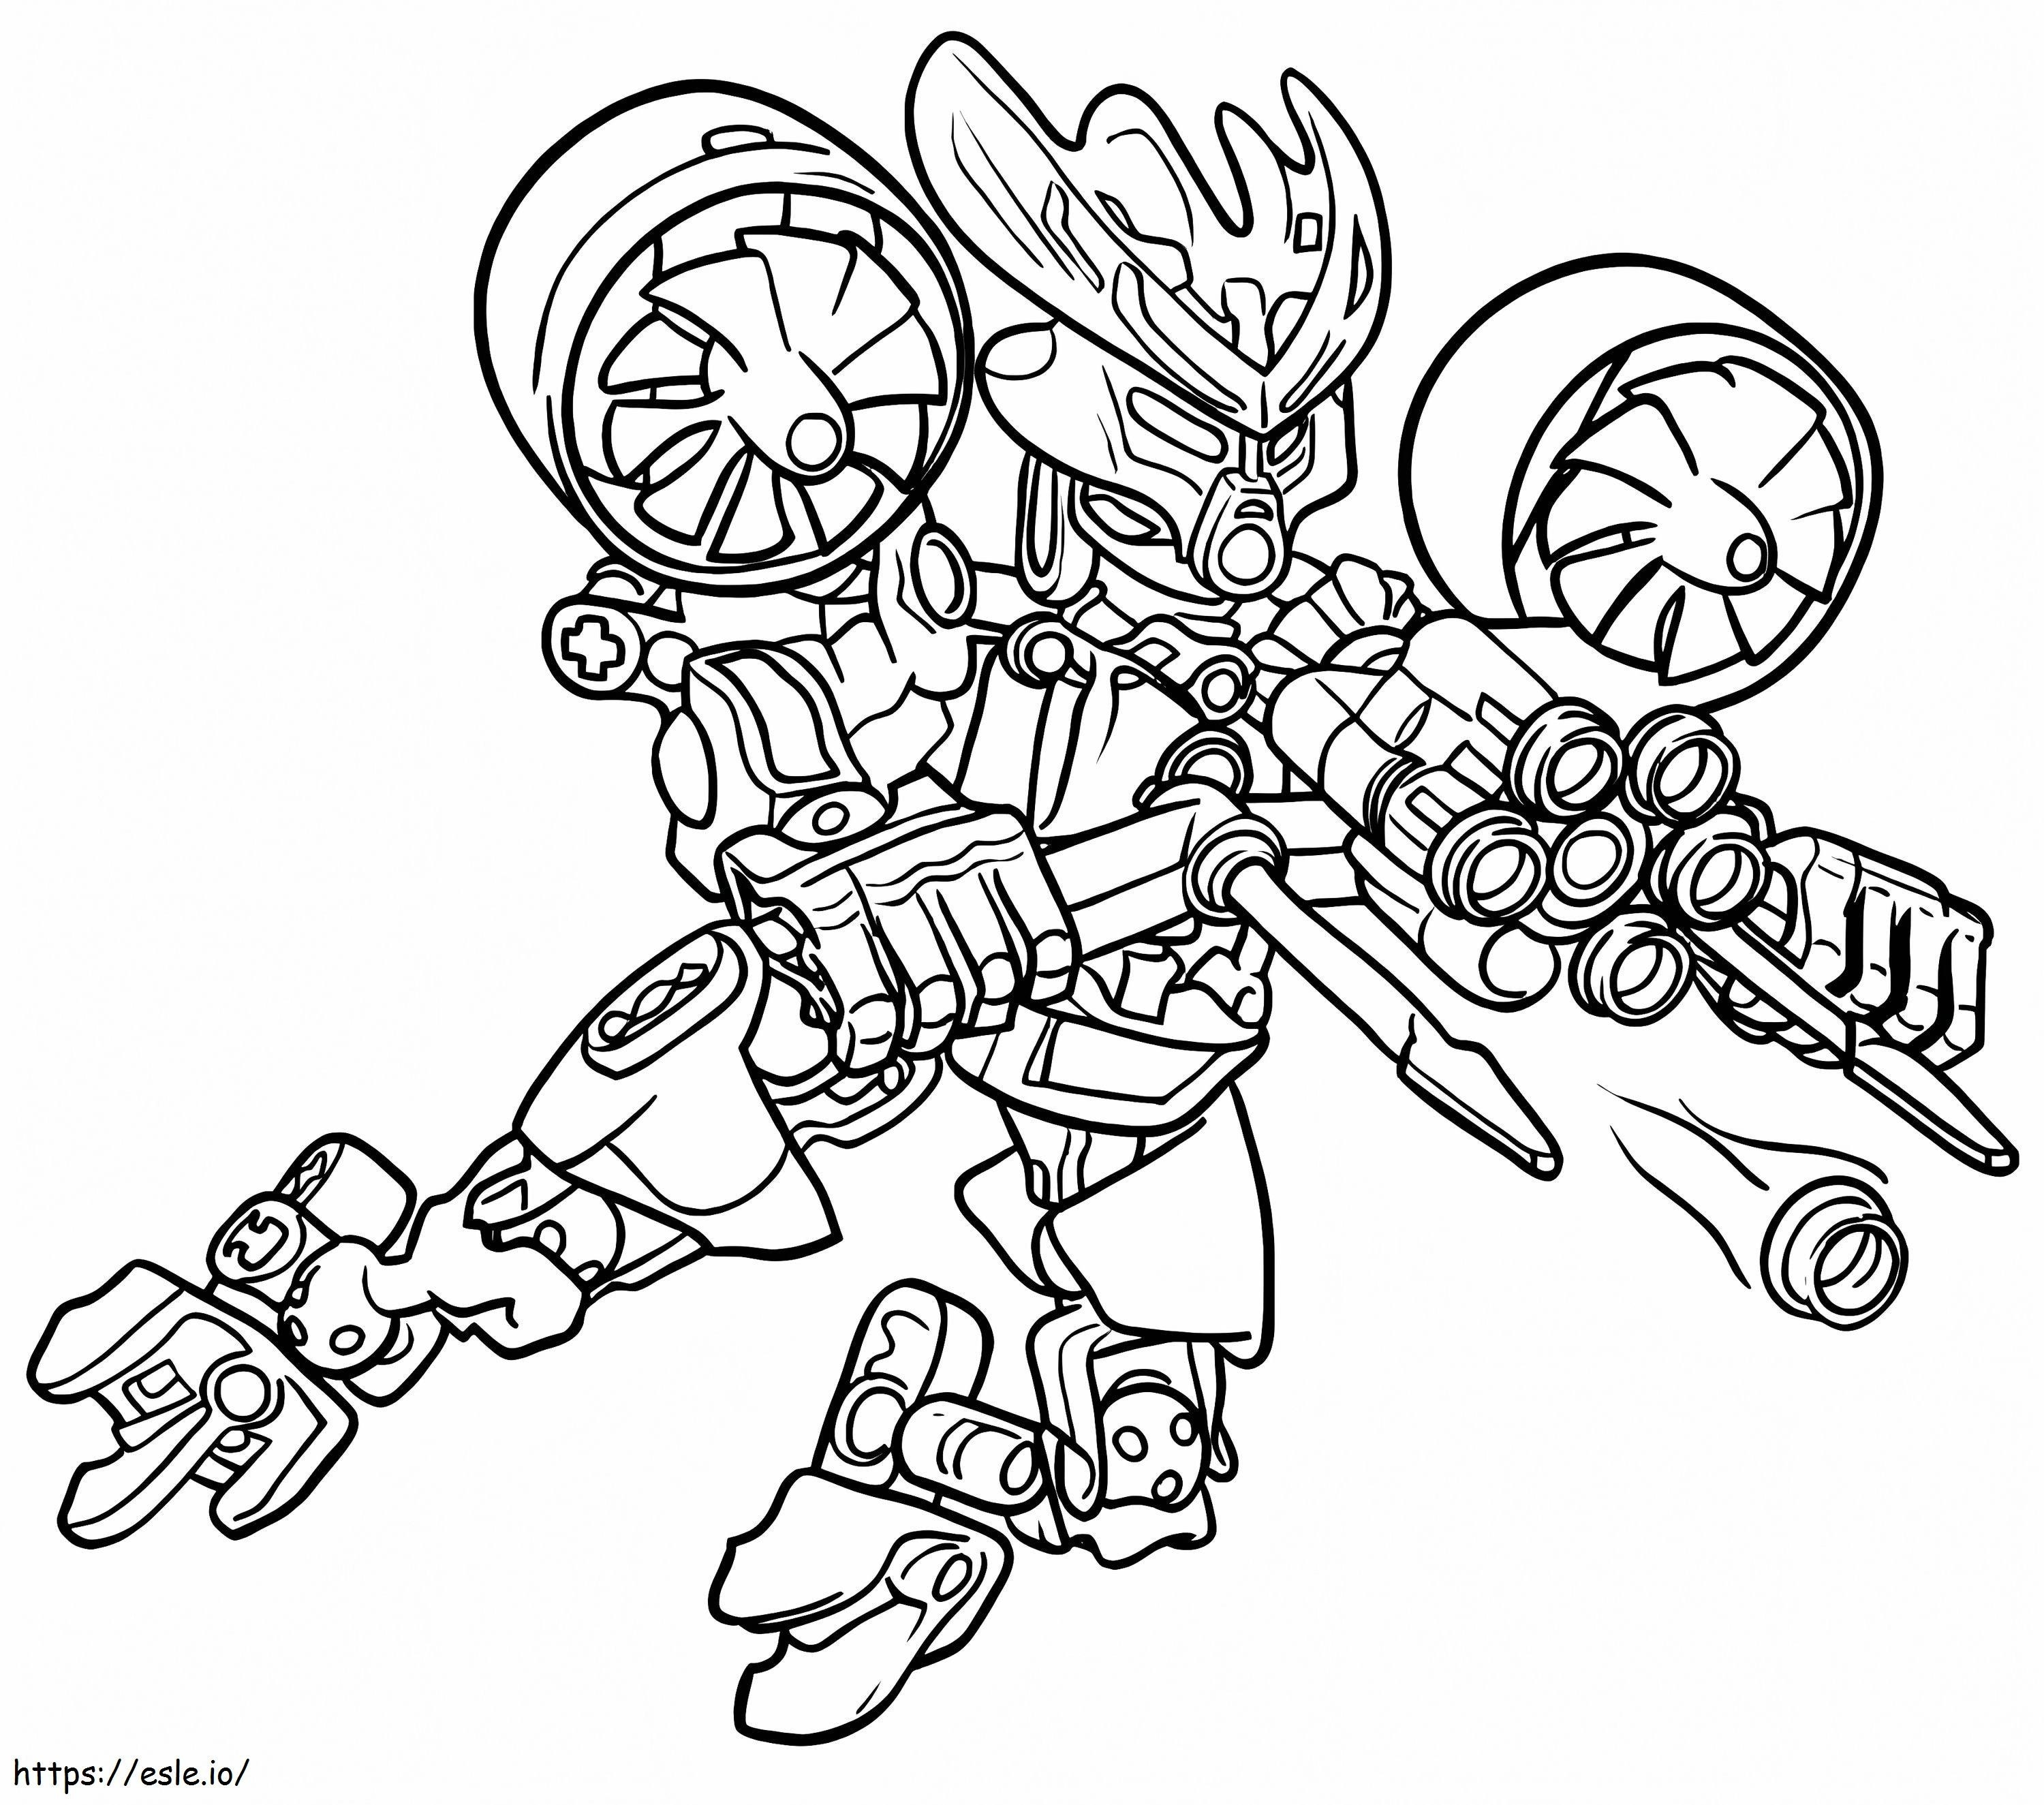 Protector Of Water Bionicle coloring page